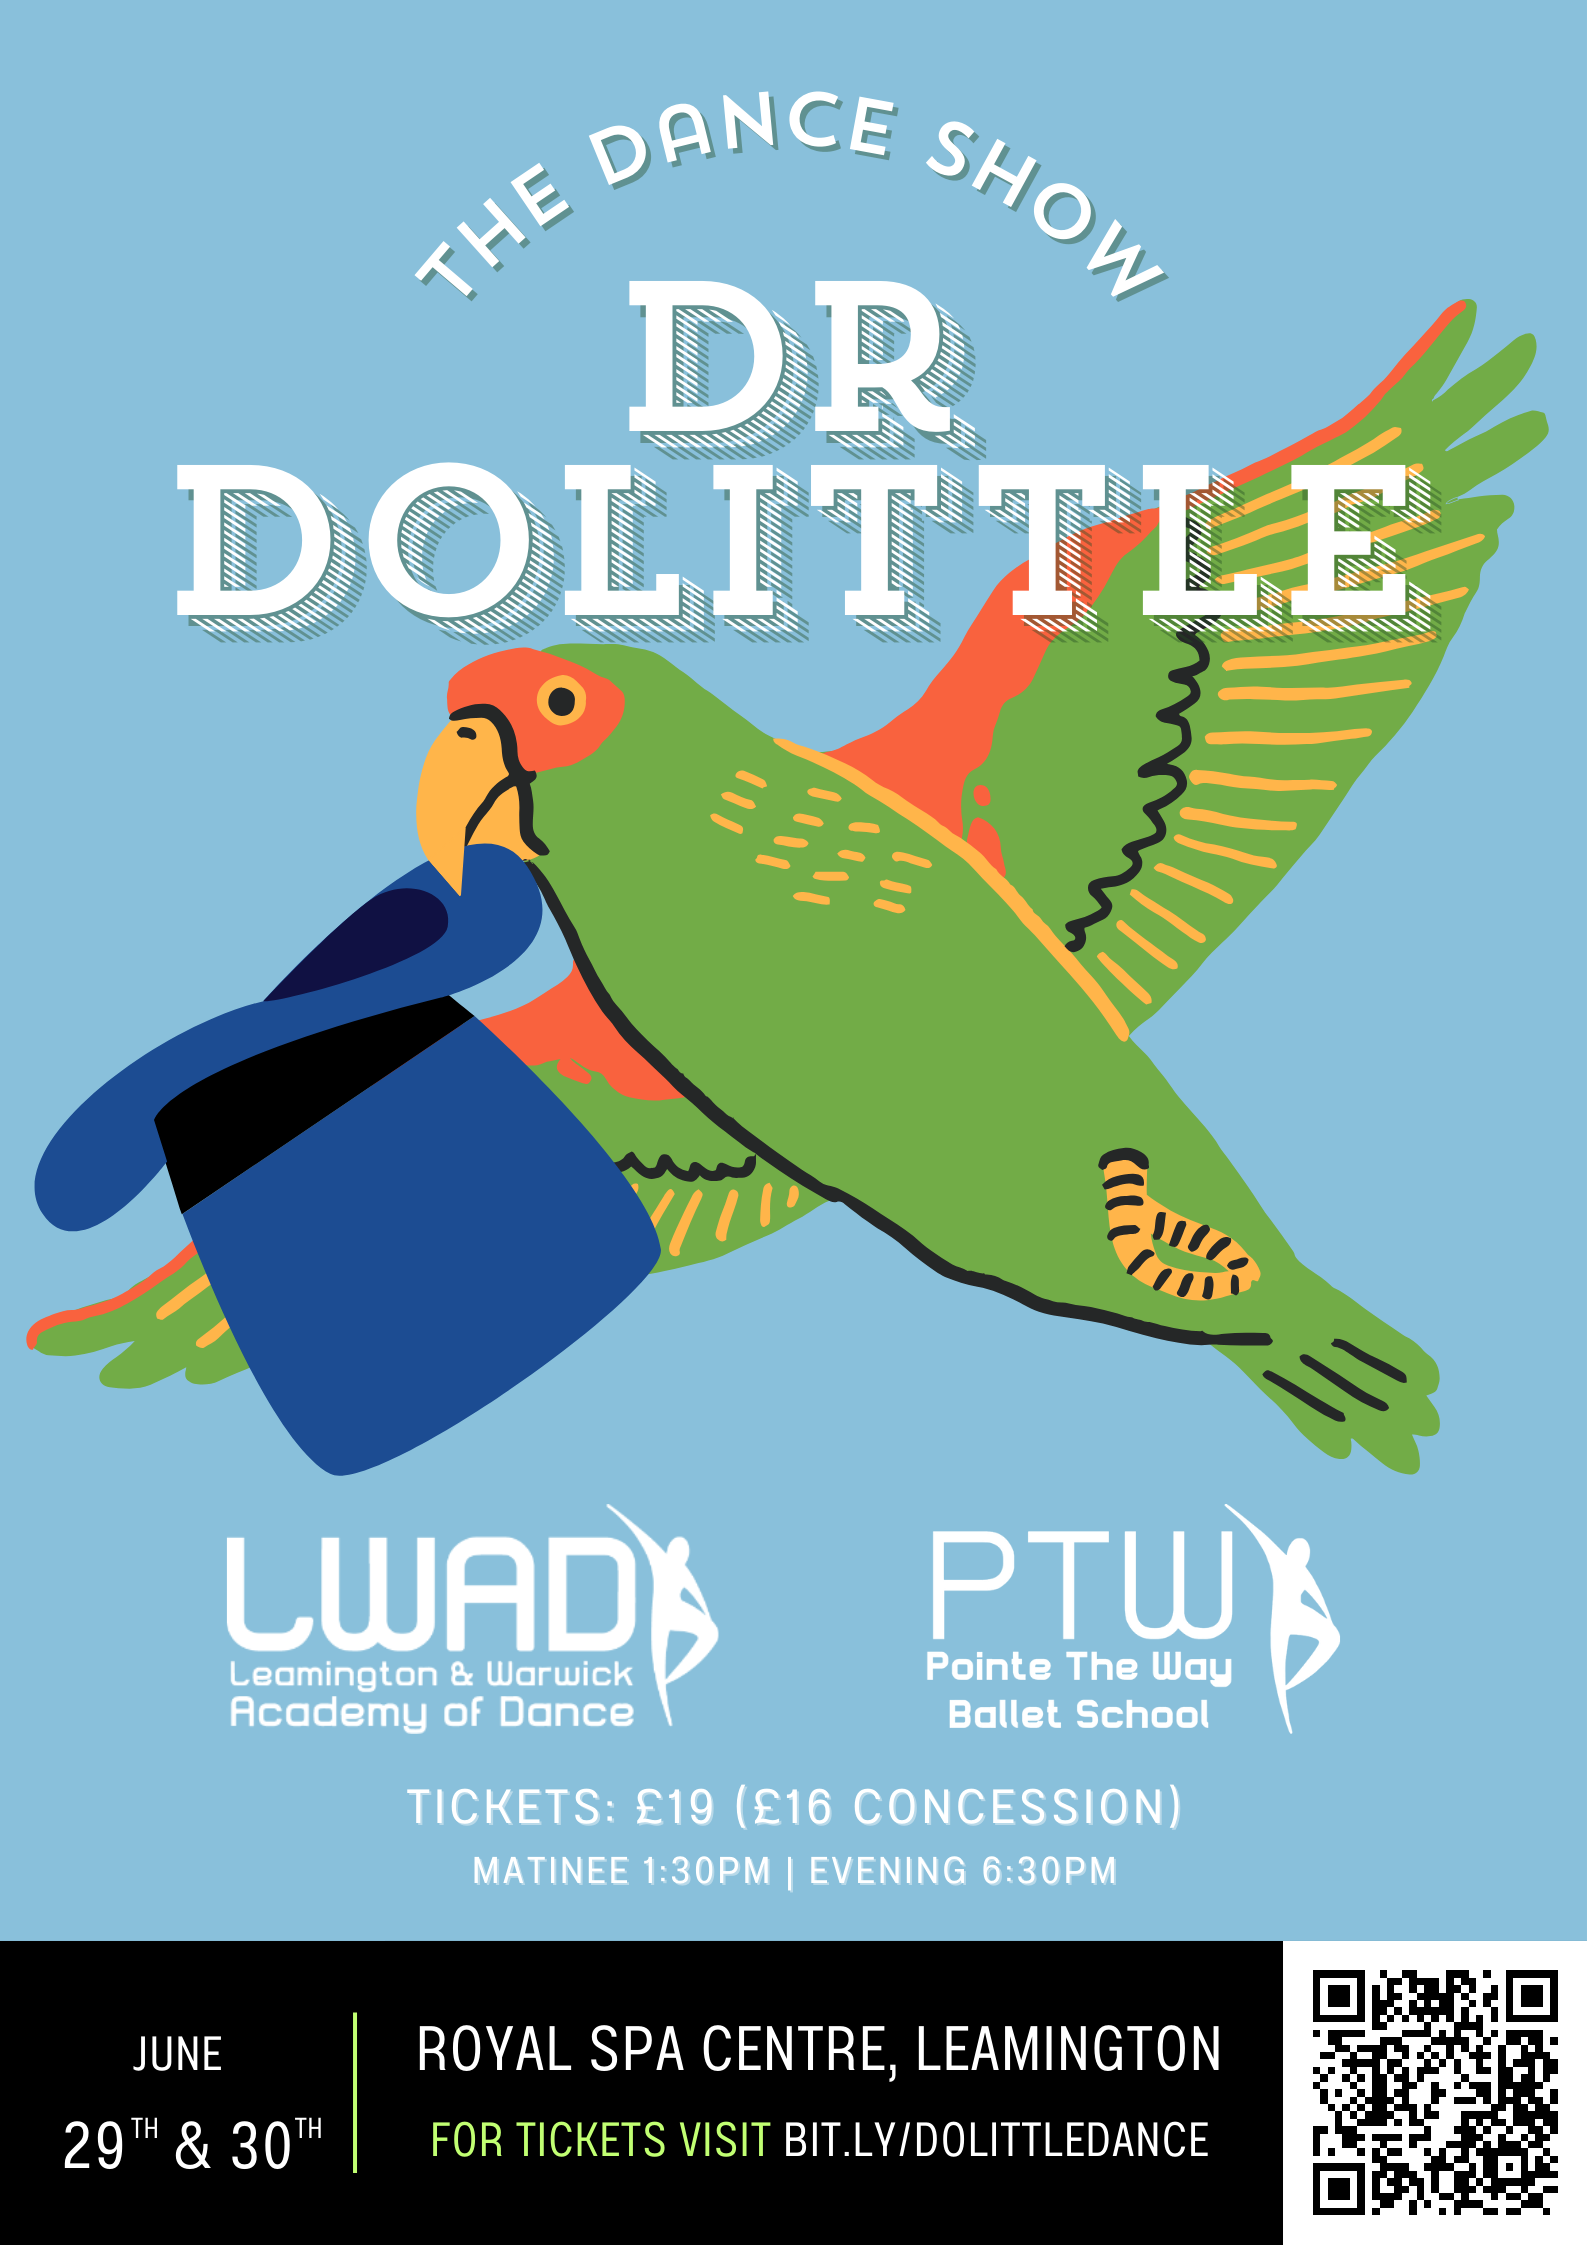 Dr Dolittle - the dance show - LWAD & PTW - Tickets: £19 (£16 Concession) Matinee 1:30PM | Evening 6:30PM - June 29th and 30th - Royal Spa Centre, Leamington - For Tickets Visit bit.ly/dolittledance